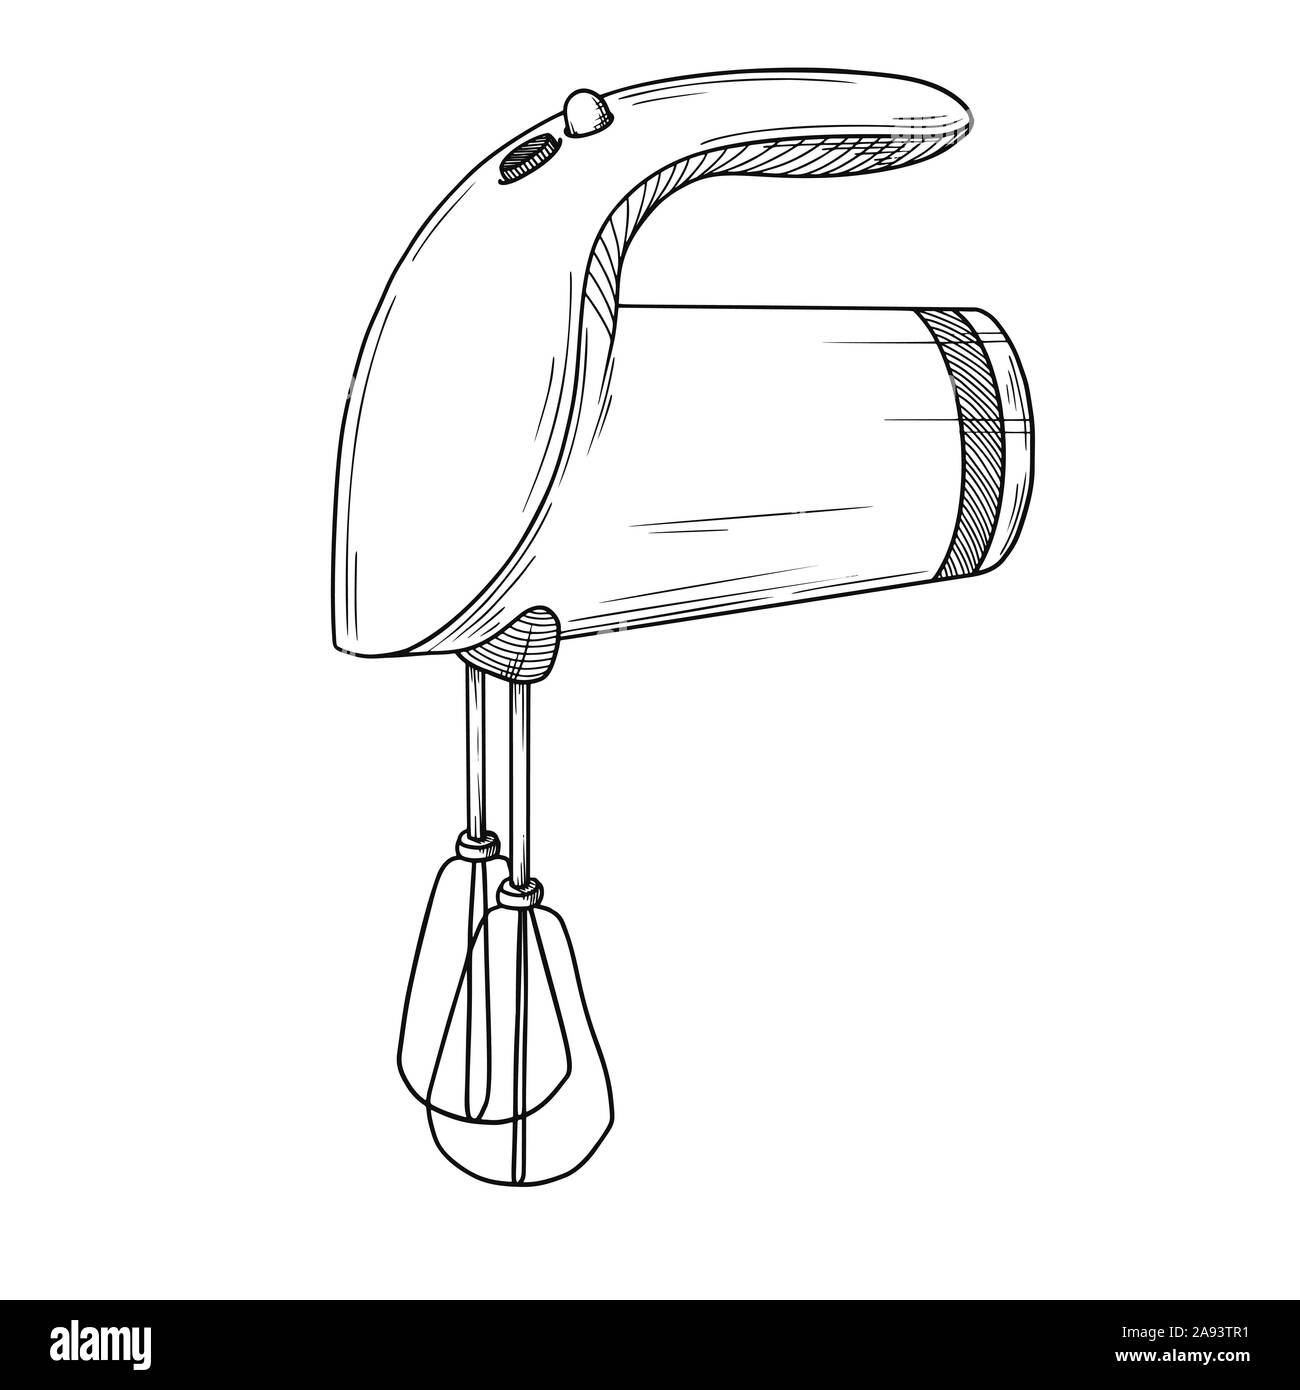 Hand mixer isolated on white background. Vector illustration in sketch style. Stock Vector